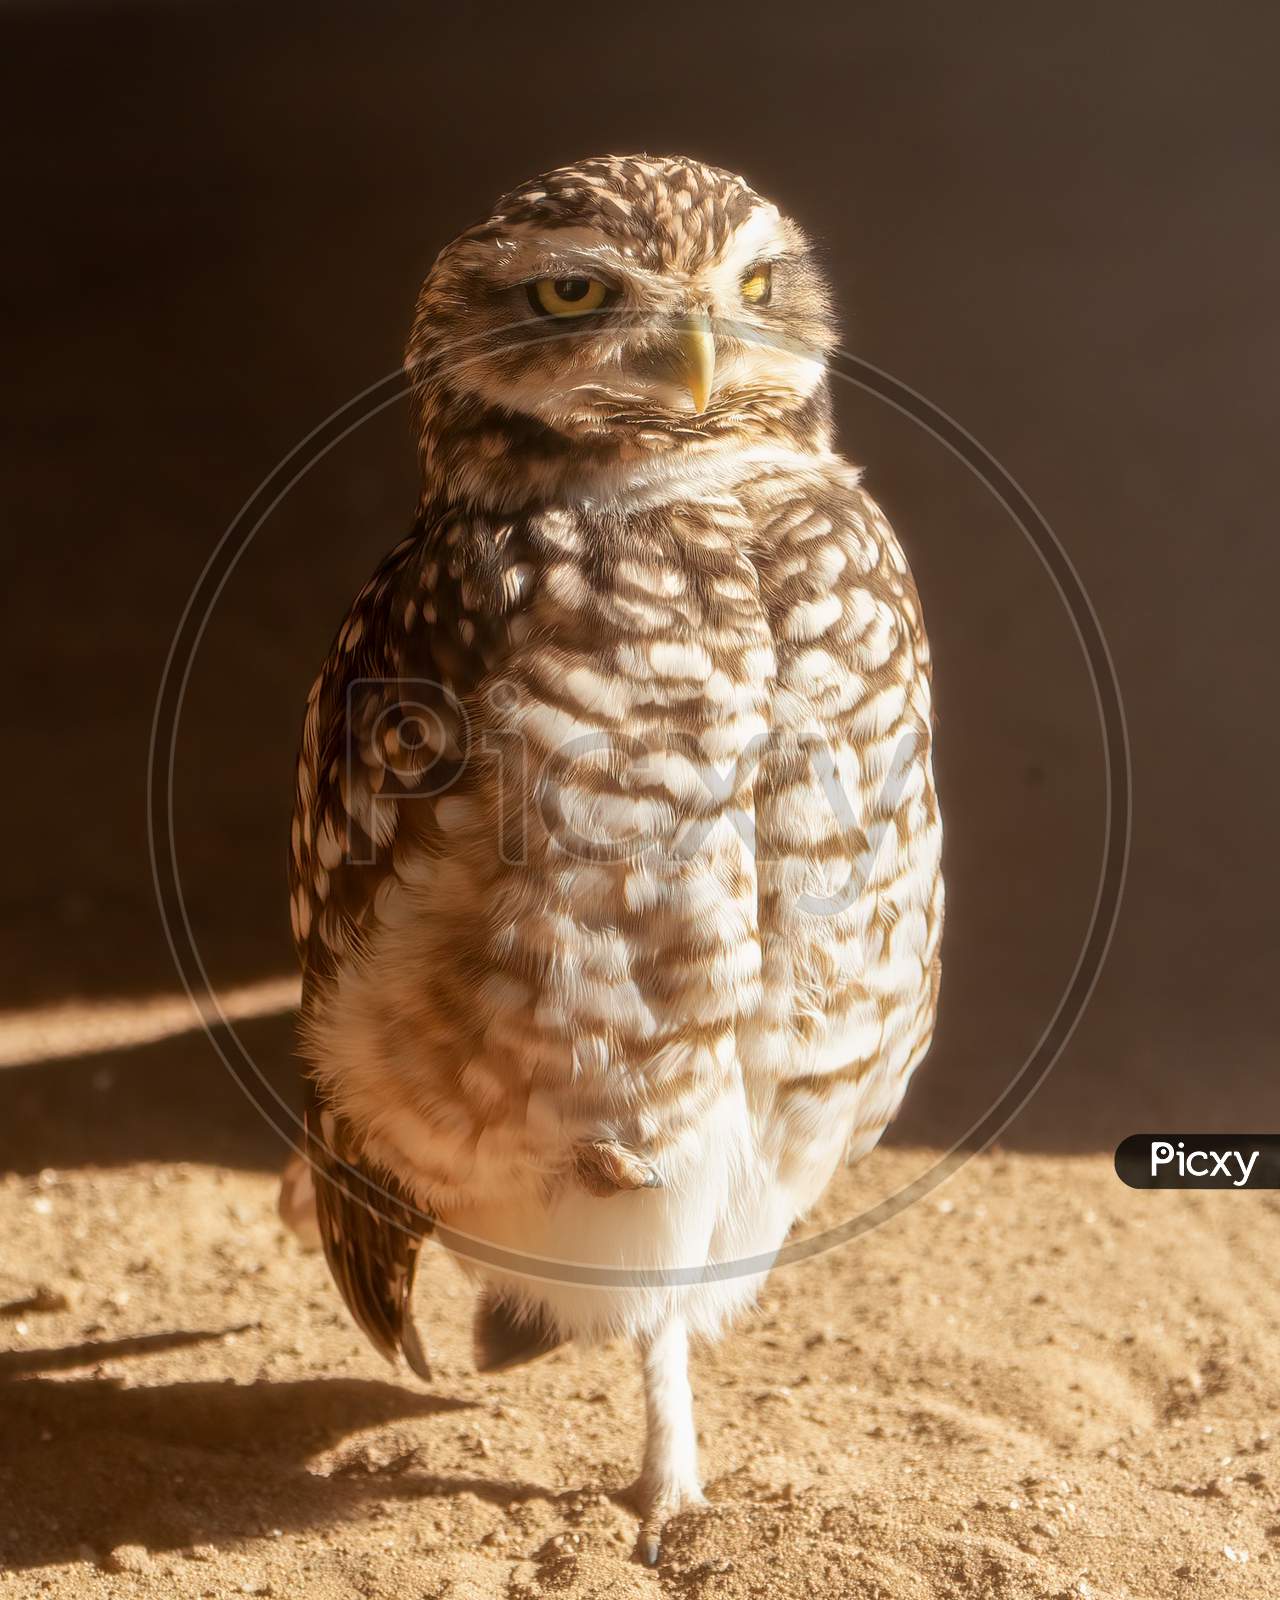 Cute Burrowing Owl (Athene Cunicularia) On A Sandy Background. Adorable Small Bird Of Prey